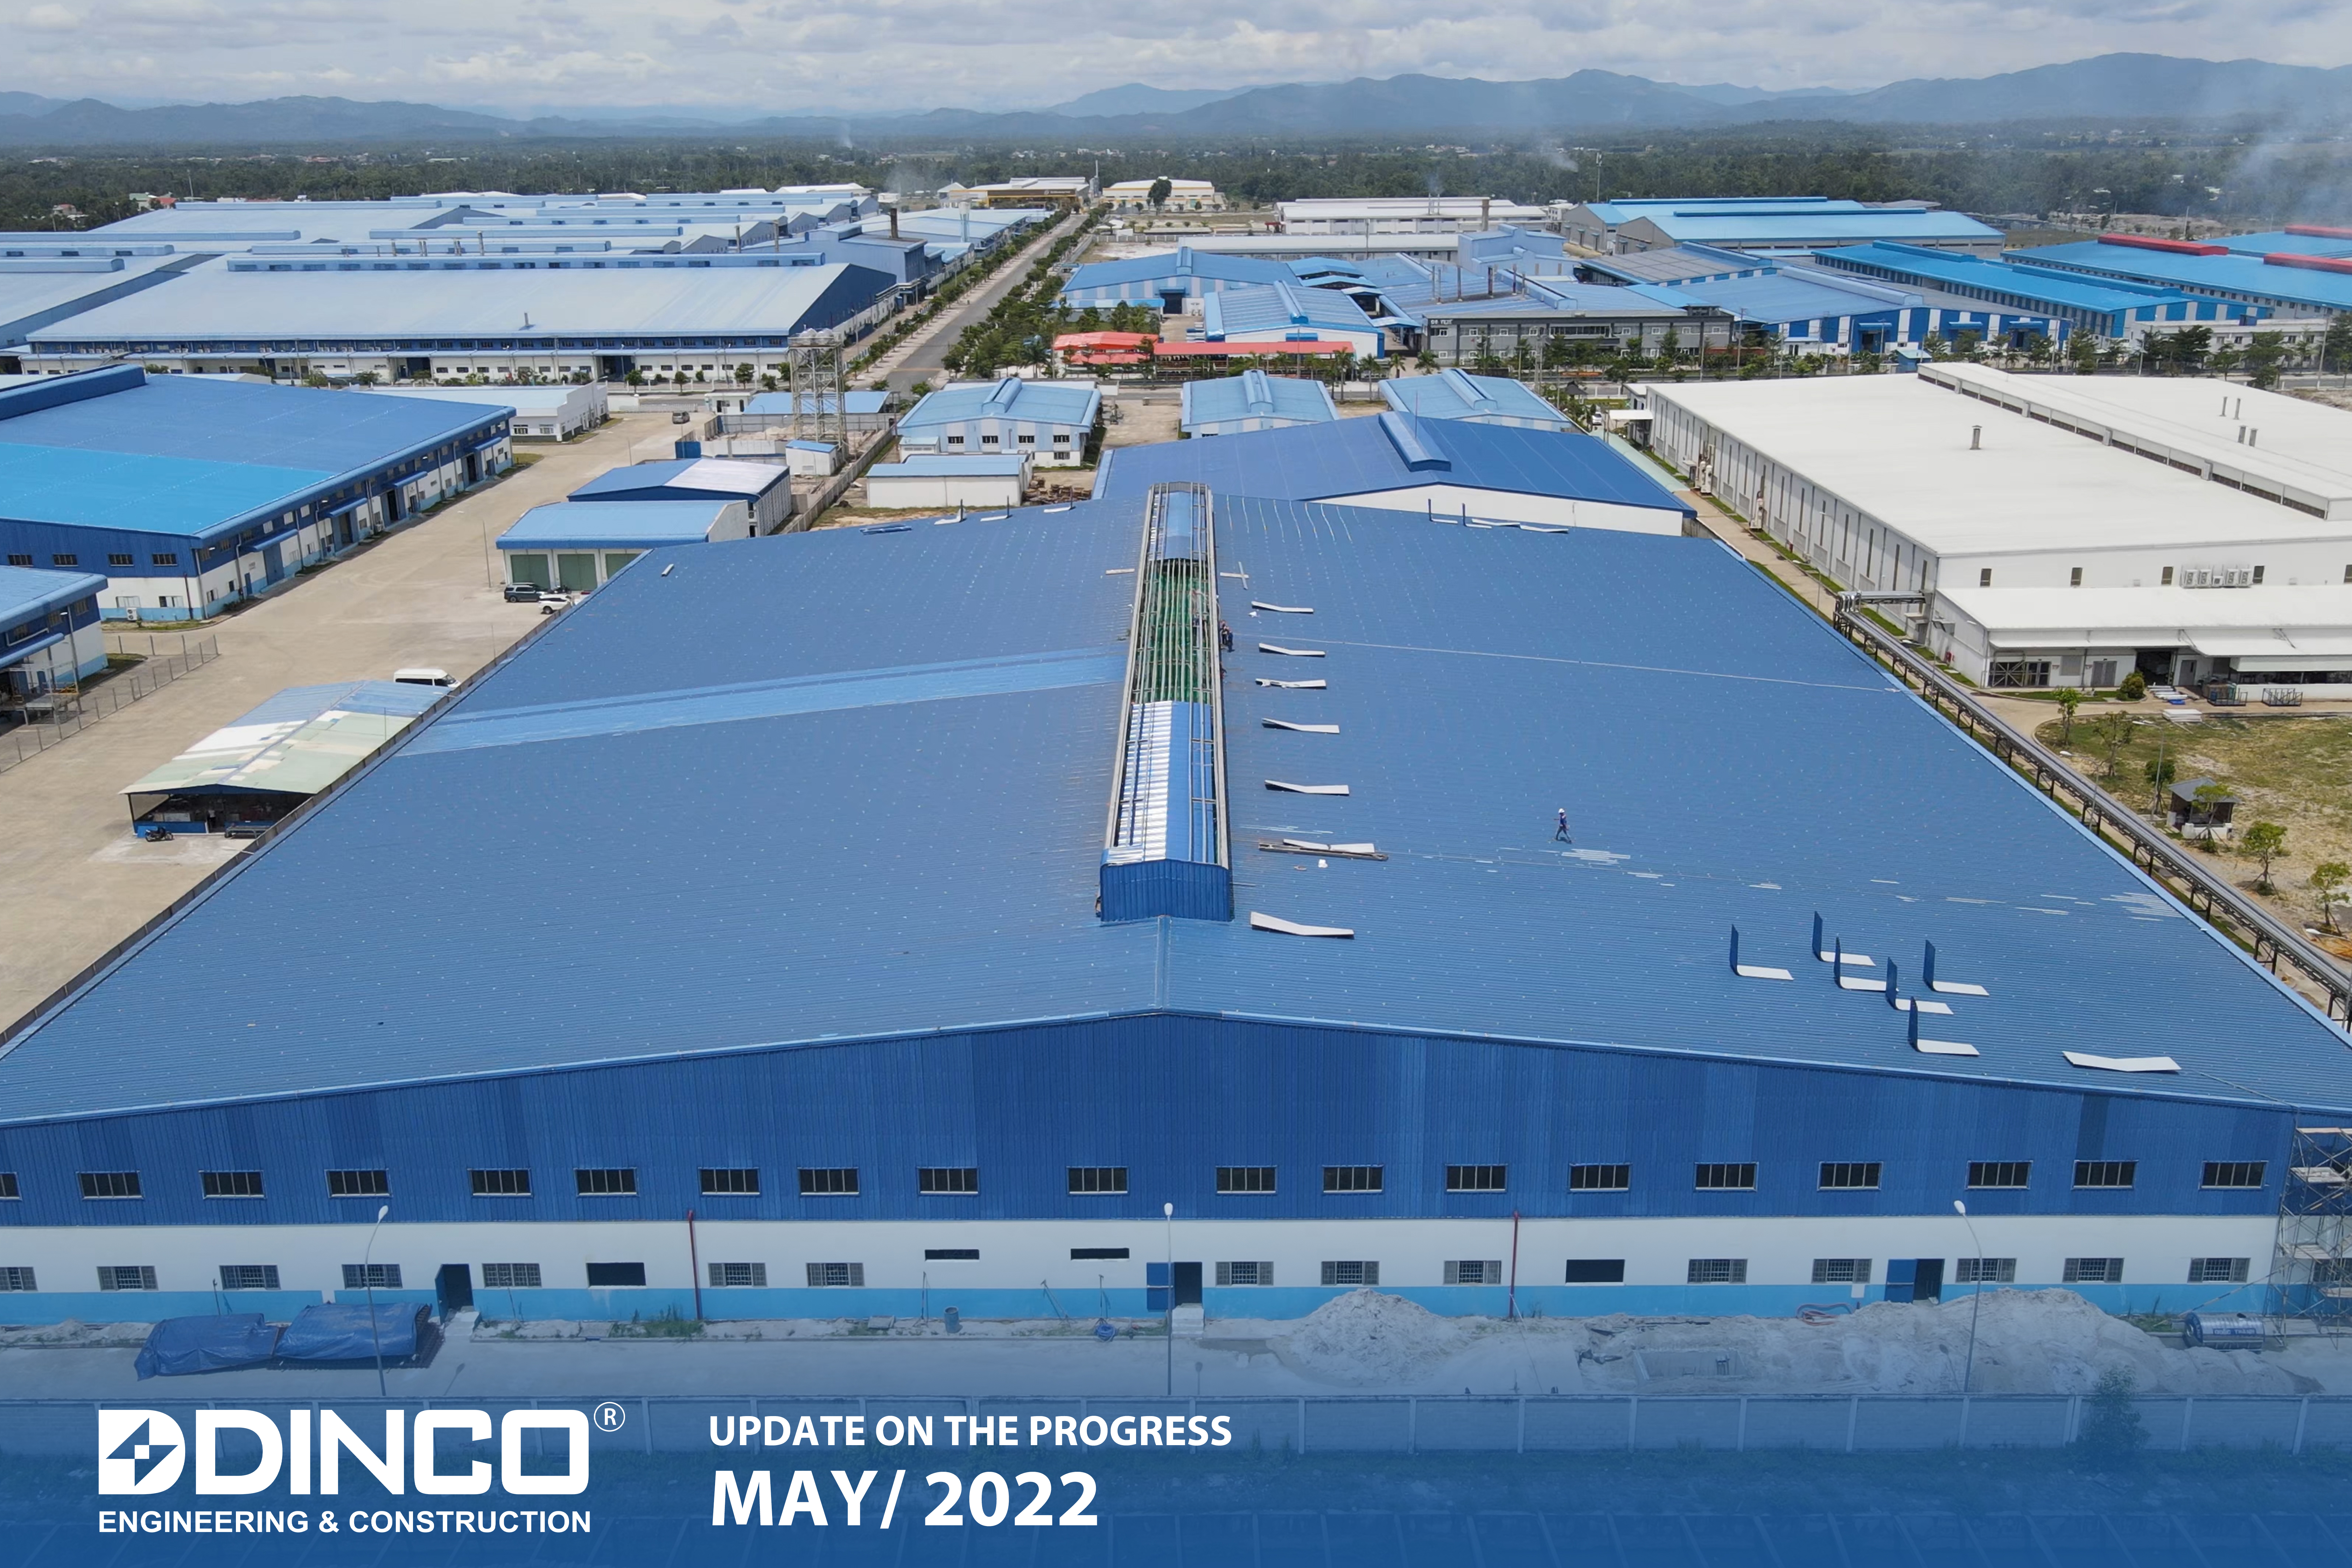 UPDATE PROJECT PROGRESS "INVESTMENT AND CONSTRUCTION OF FACTORY FOR LEASE PHASE 2 - DRAEXLMAIER AUTOMOTIVE VIETNAM" IN MAY 2022